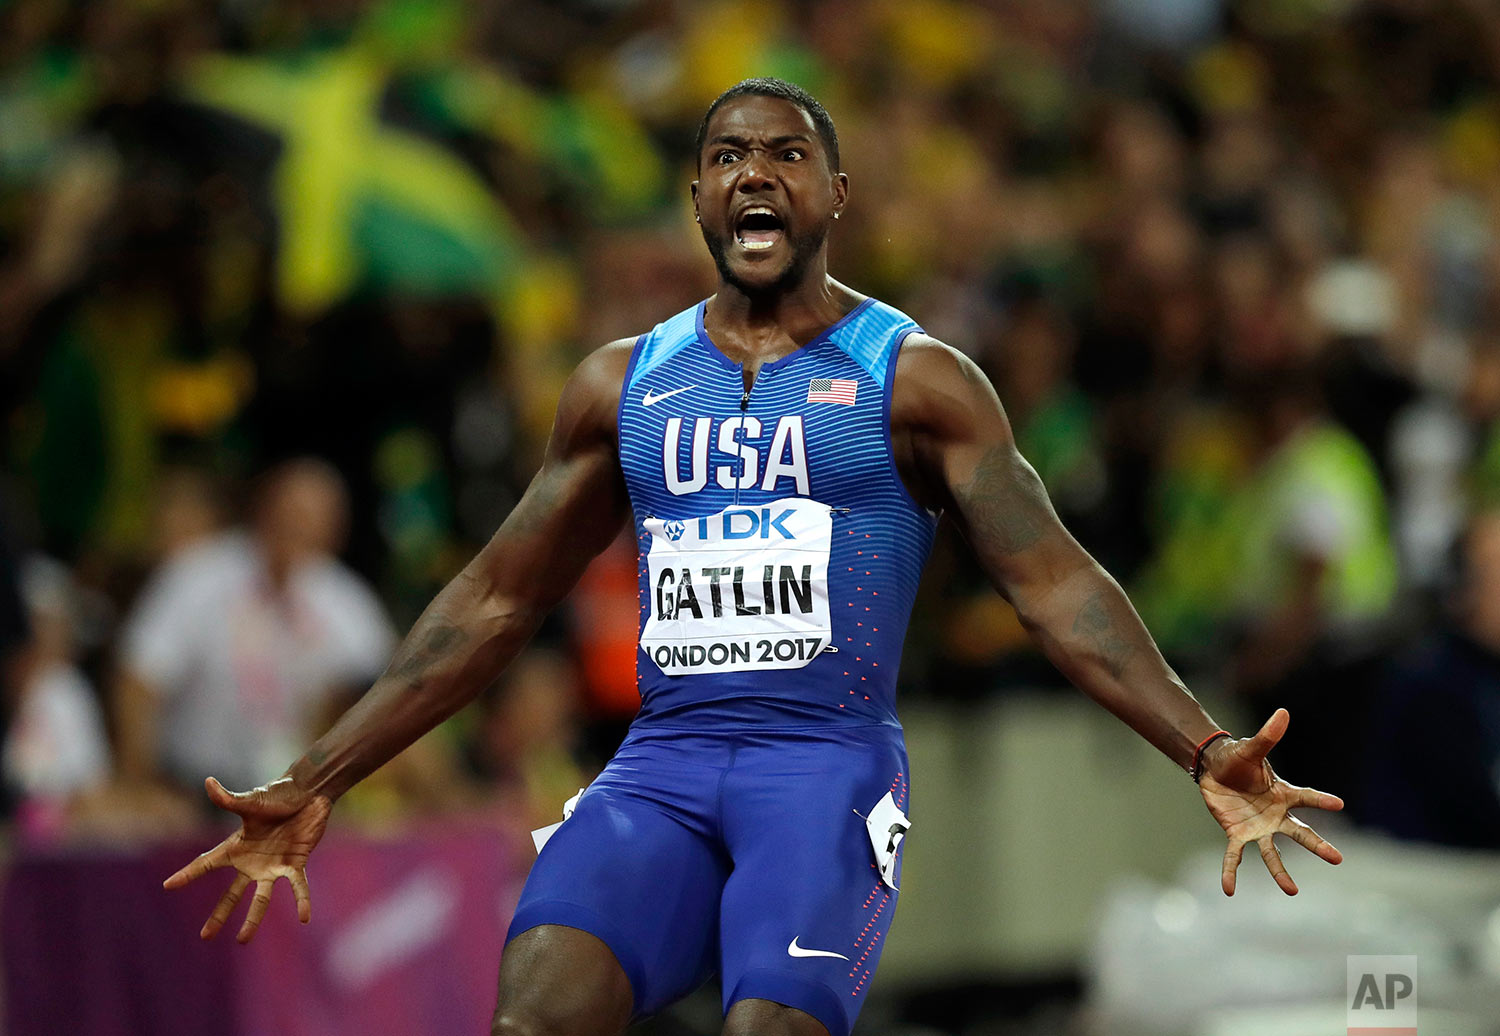  United States' Justin Gatlin reacts after winning the Men's 100 meters final during the World Athletics Championships in London Saturday, Aug. 5, 2017. (AP Photo/Tim Ireland) 